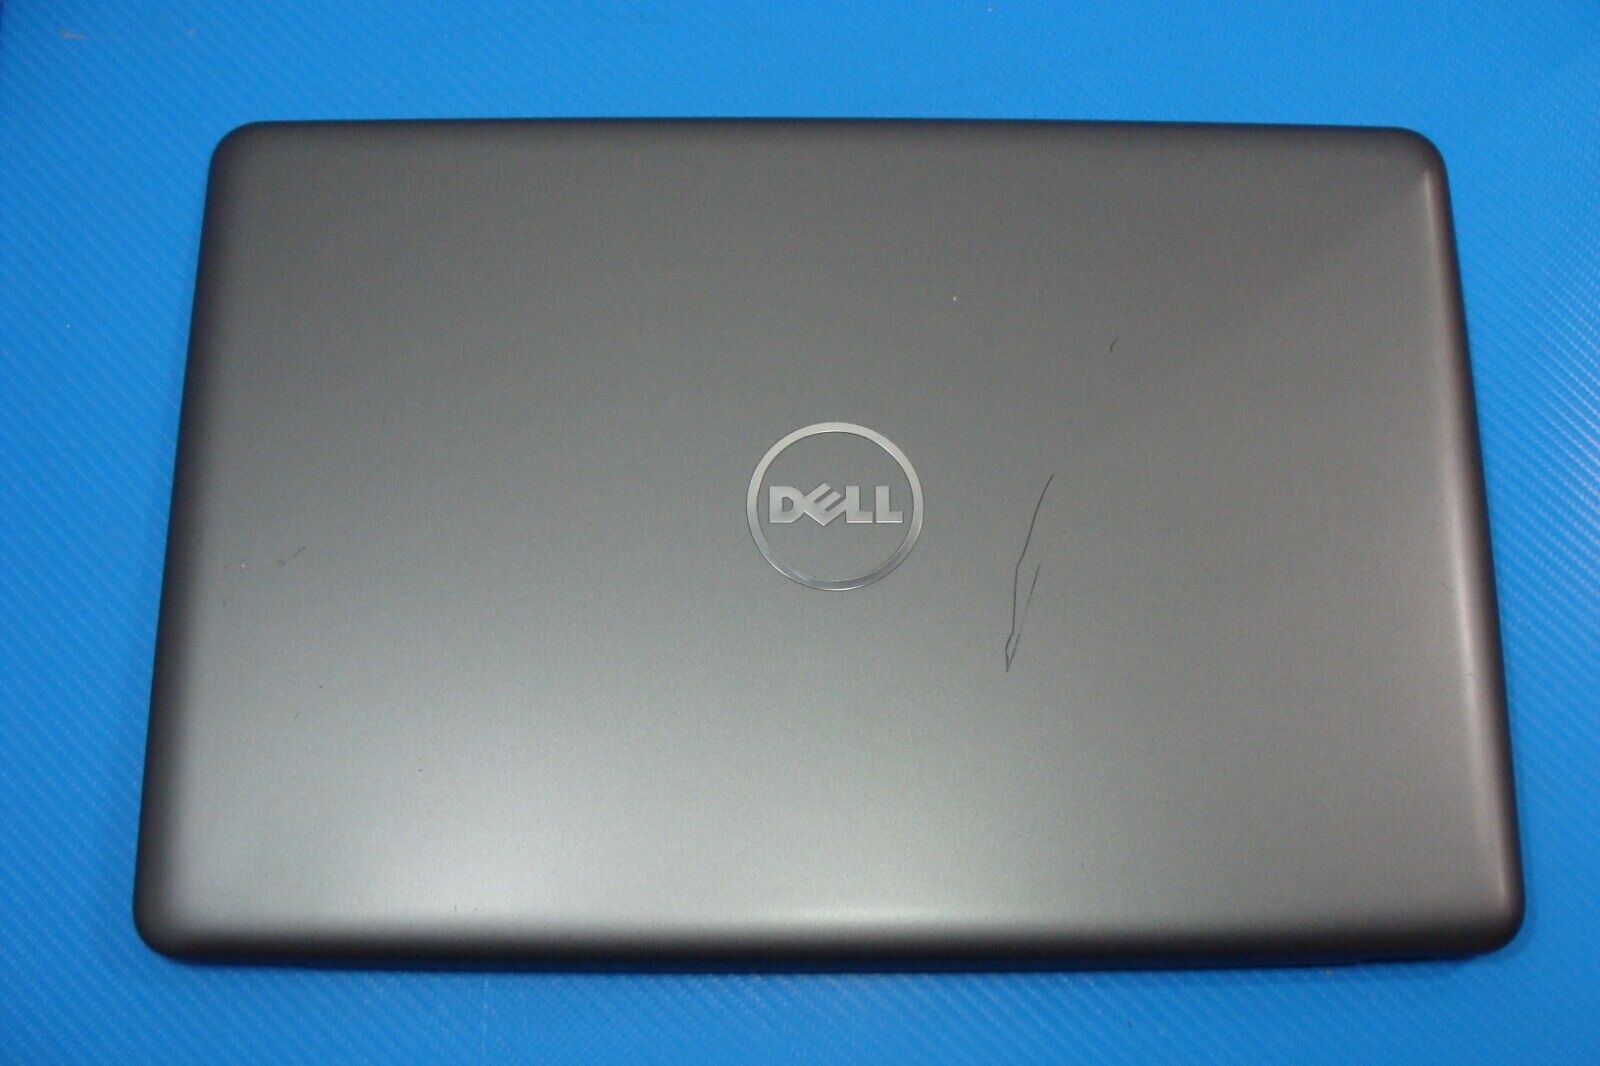 Dell Inspiron 15.6” 15 5567 Genuine Laptop HD LCD Screen Complete Assembly